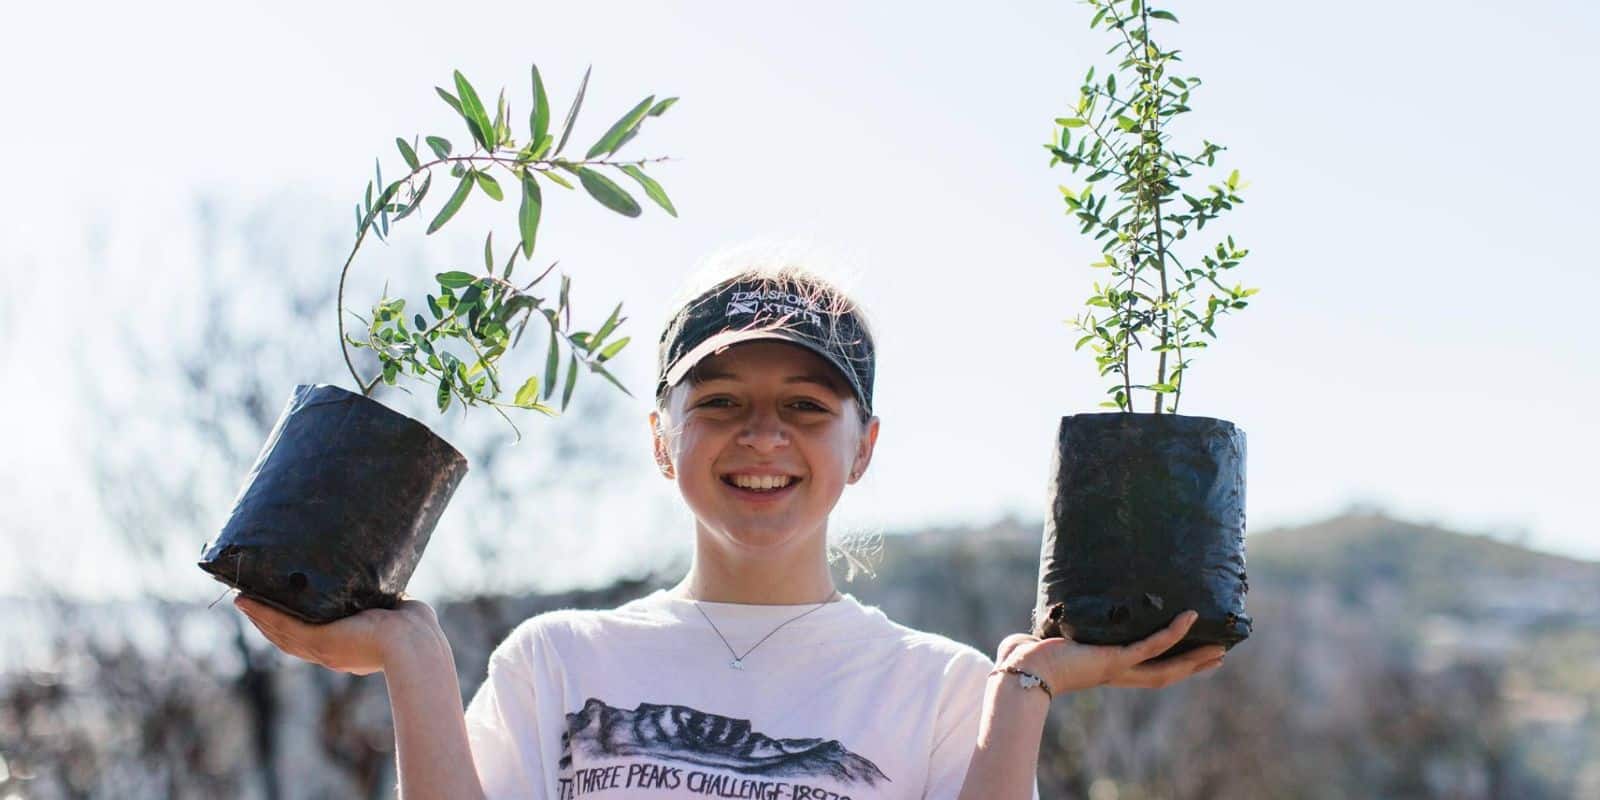 Volunteer smiling and holding two plants in her hands.